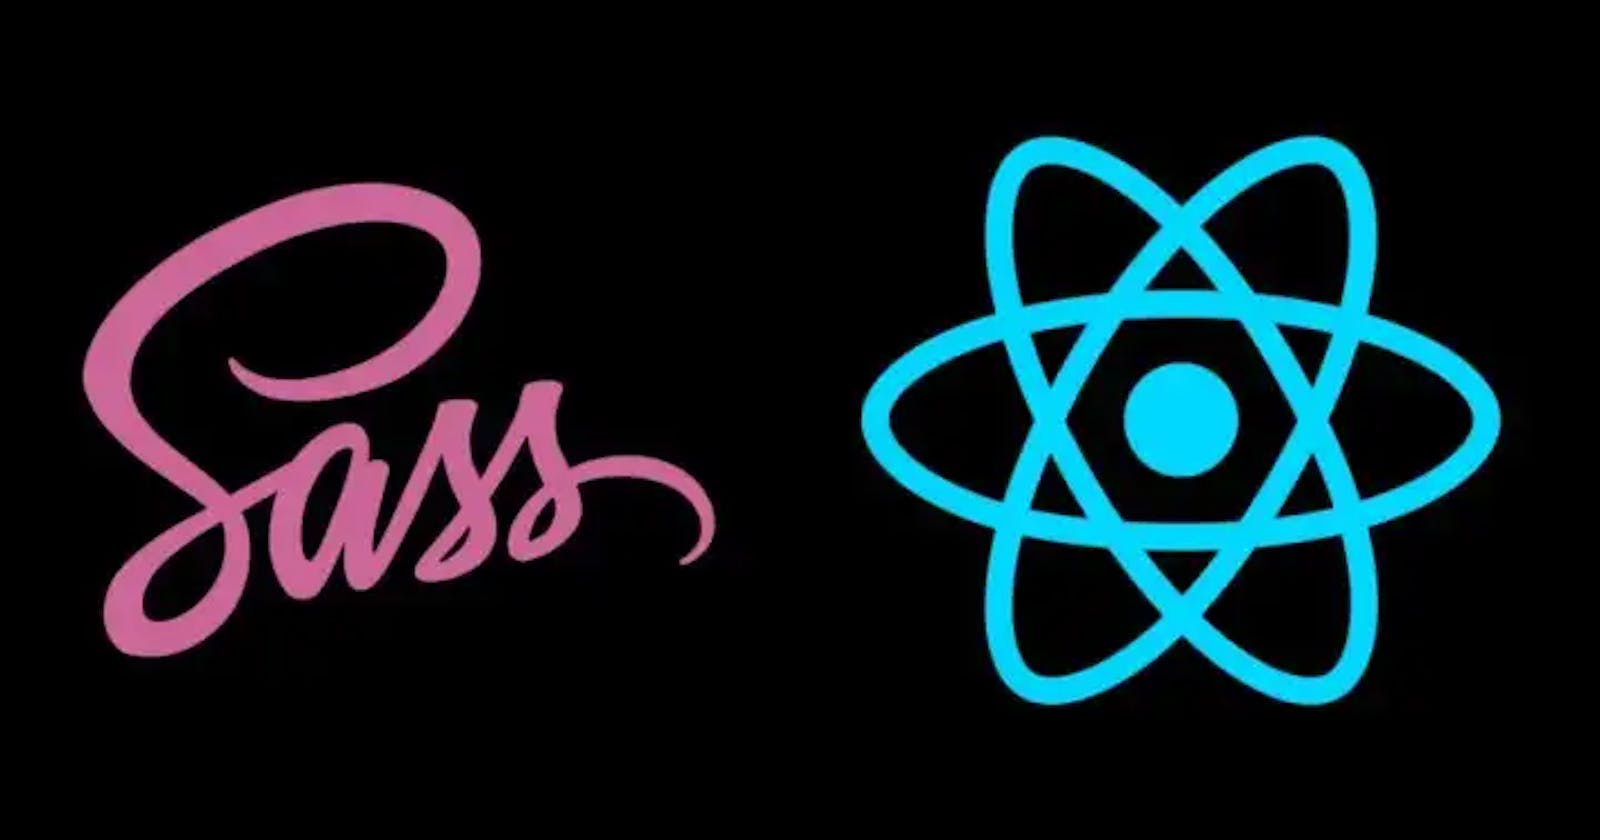 Using SASS in React Js Applications